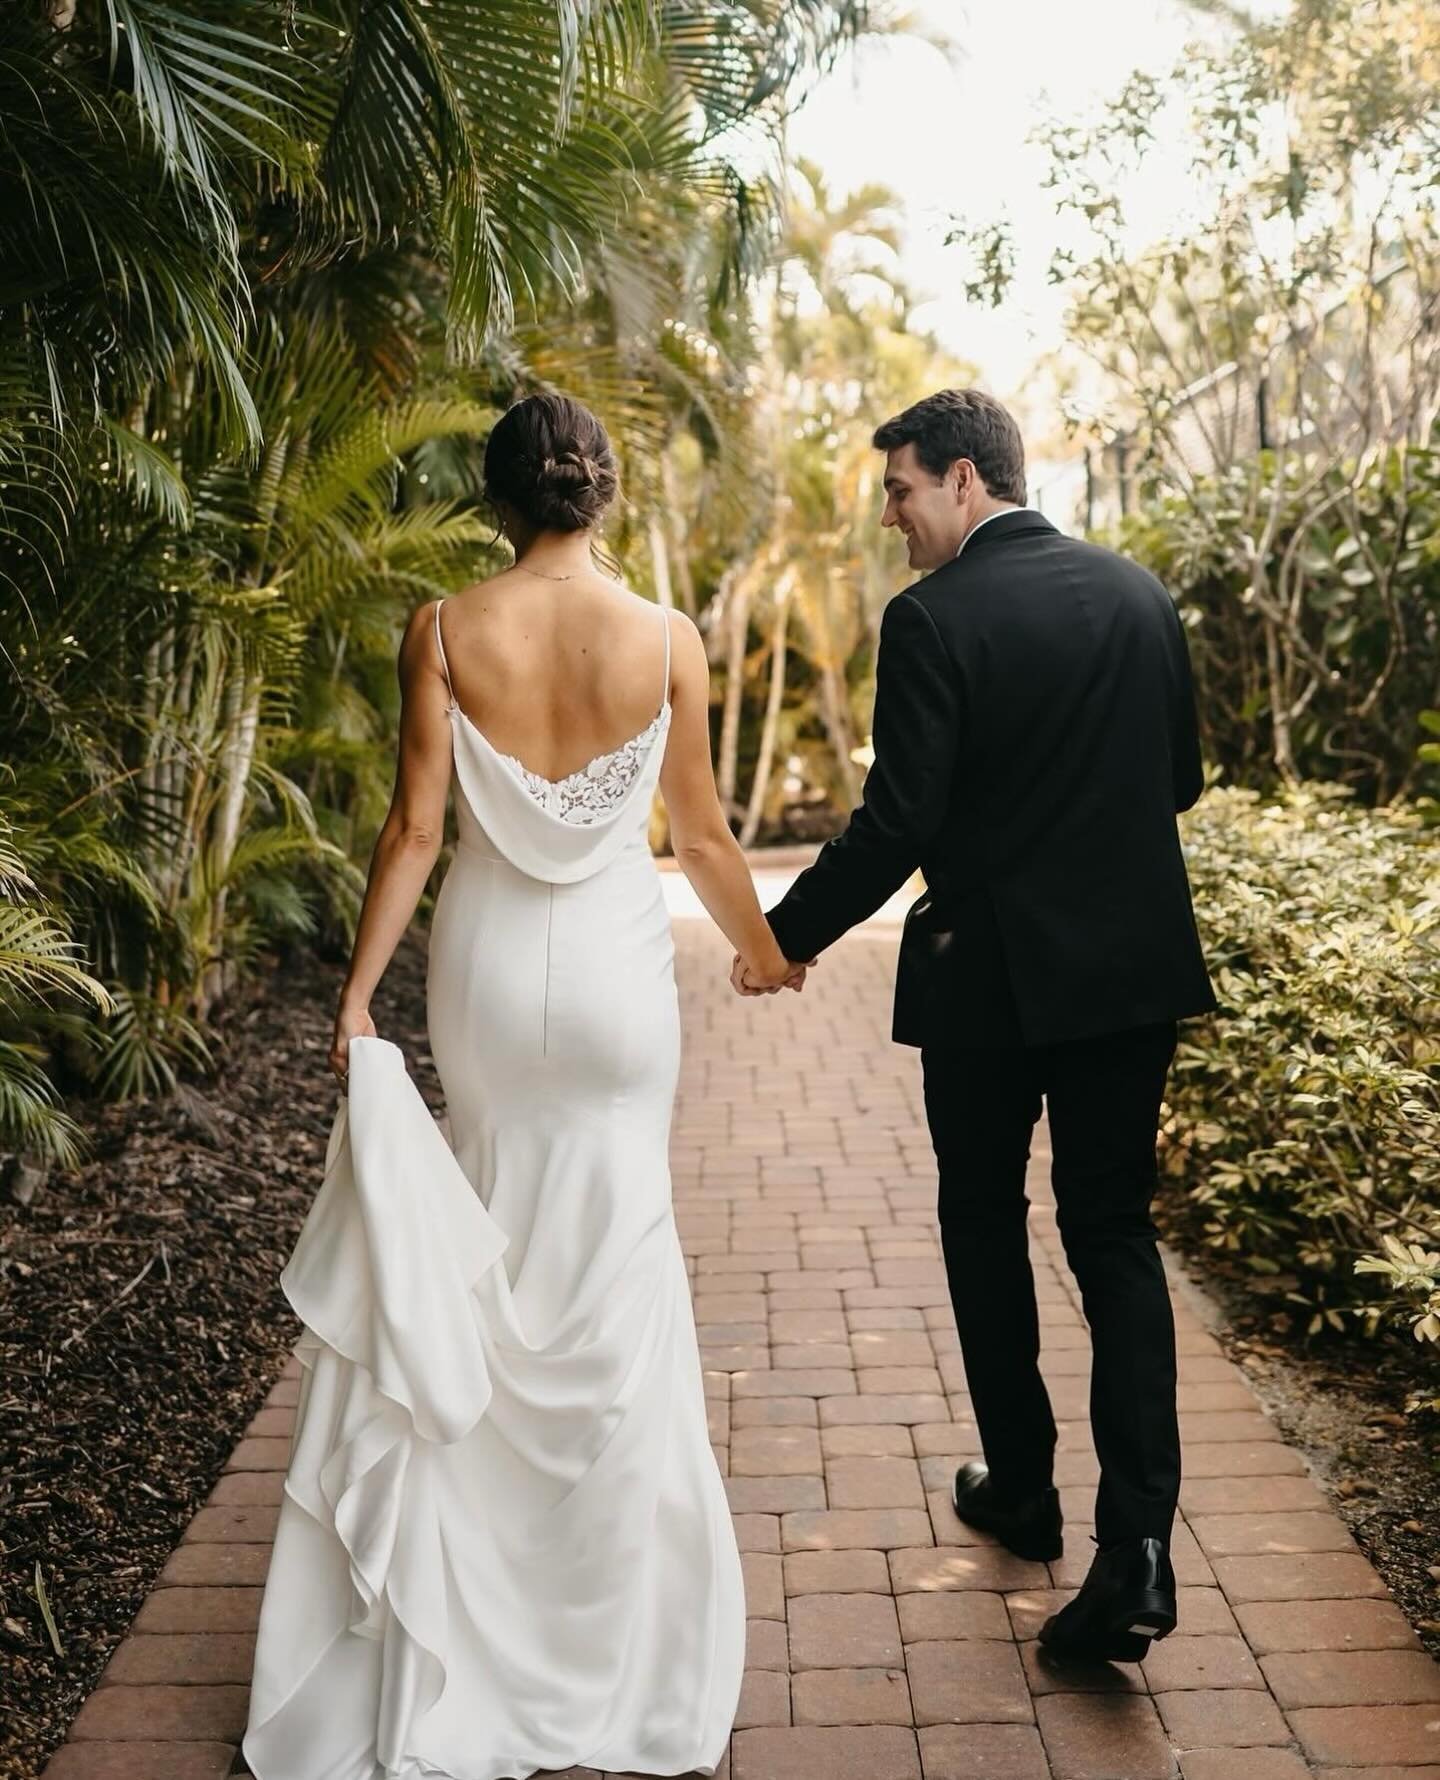 We love a good back.✨ How stunning did this beauty look in the 2377 by @mikaellabridal?!

Photography: @katherinechapmanphoto
Bride: @ashley.j.peterson
Wedding dress: @mikaellabridal via @annikabridal✨

#lowbackweddingdress #weddingdressgoals #weddin